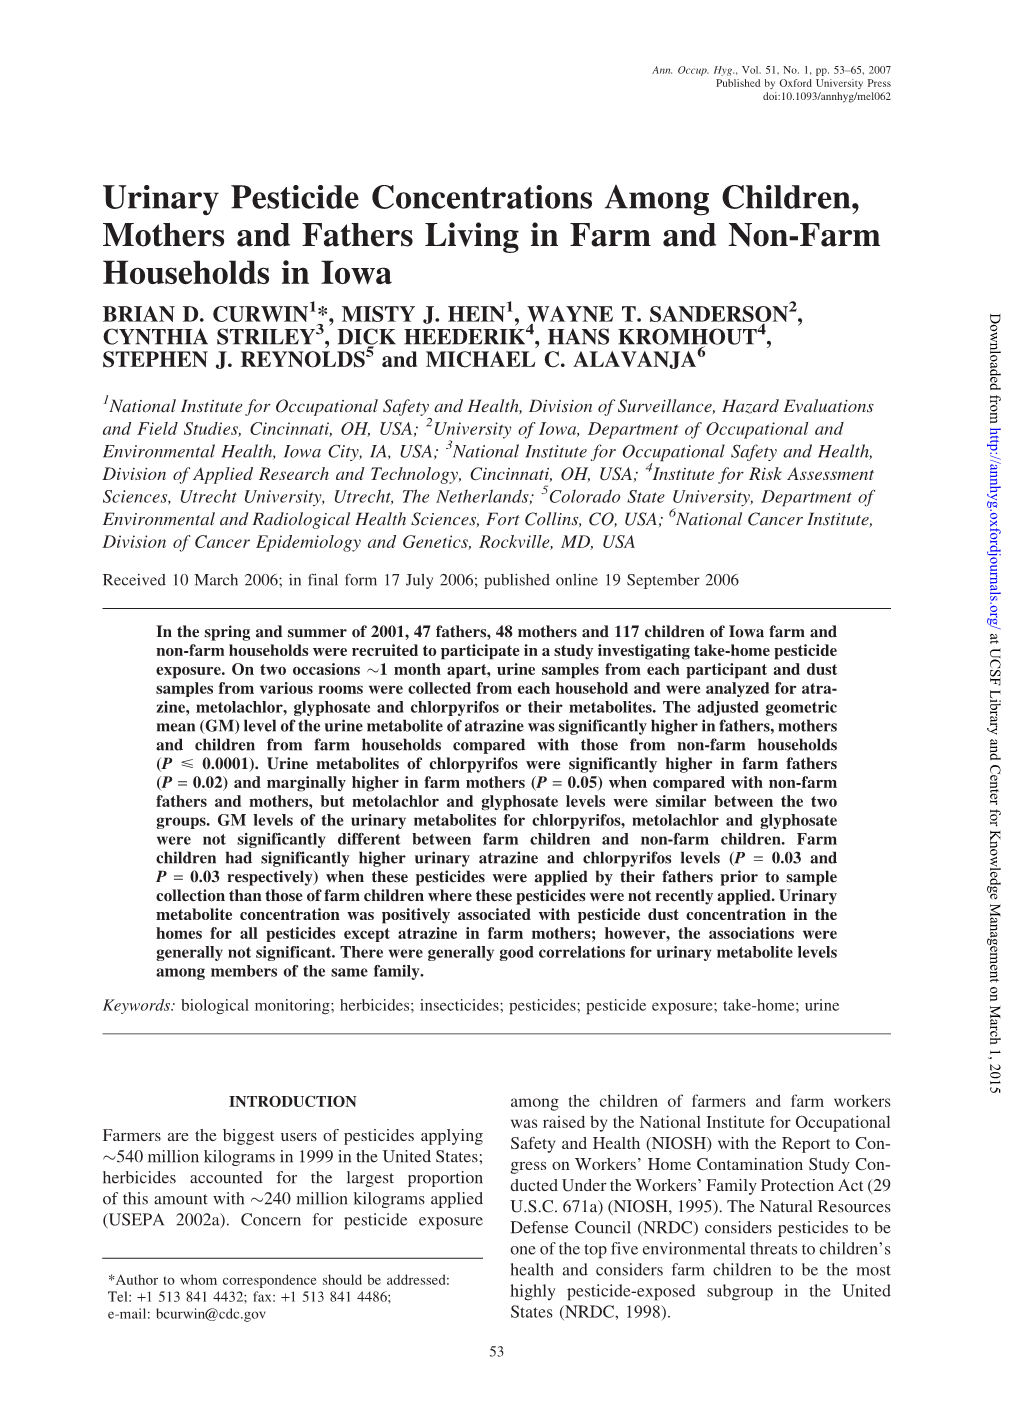 Urinary Pesticide Concentrations Among Children, Mothers and Fathers Living in Farm and Non-Farm Households in Iowa